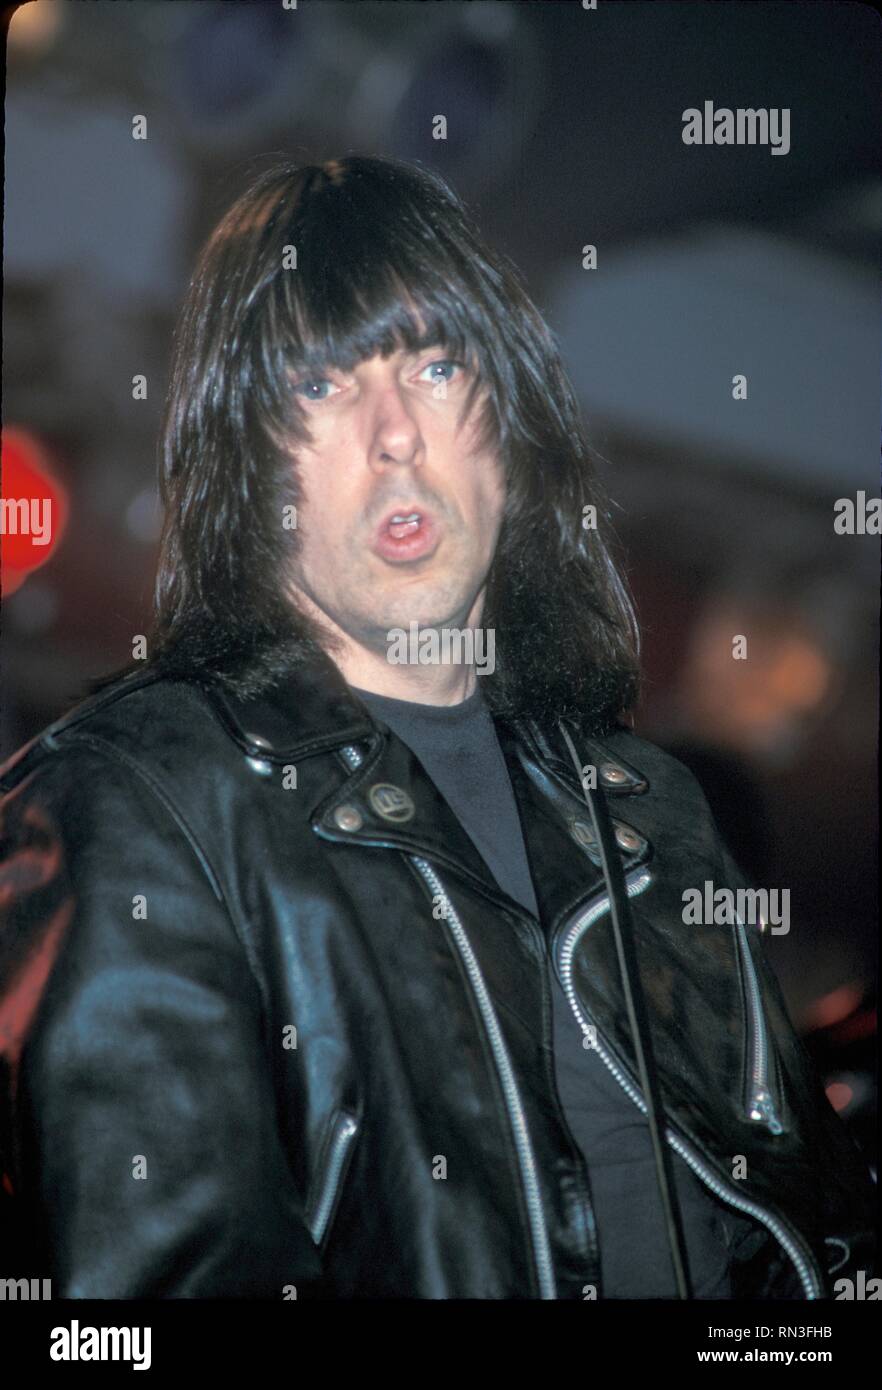 John Cummings better known by the stage name Johnny Ramone, guitarist of the punk rock band the Ramones is shown performing on stage during a 'live' concert appearance. Stock Photo